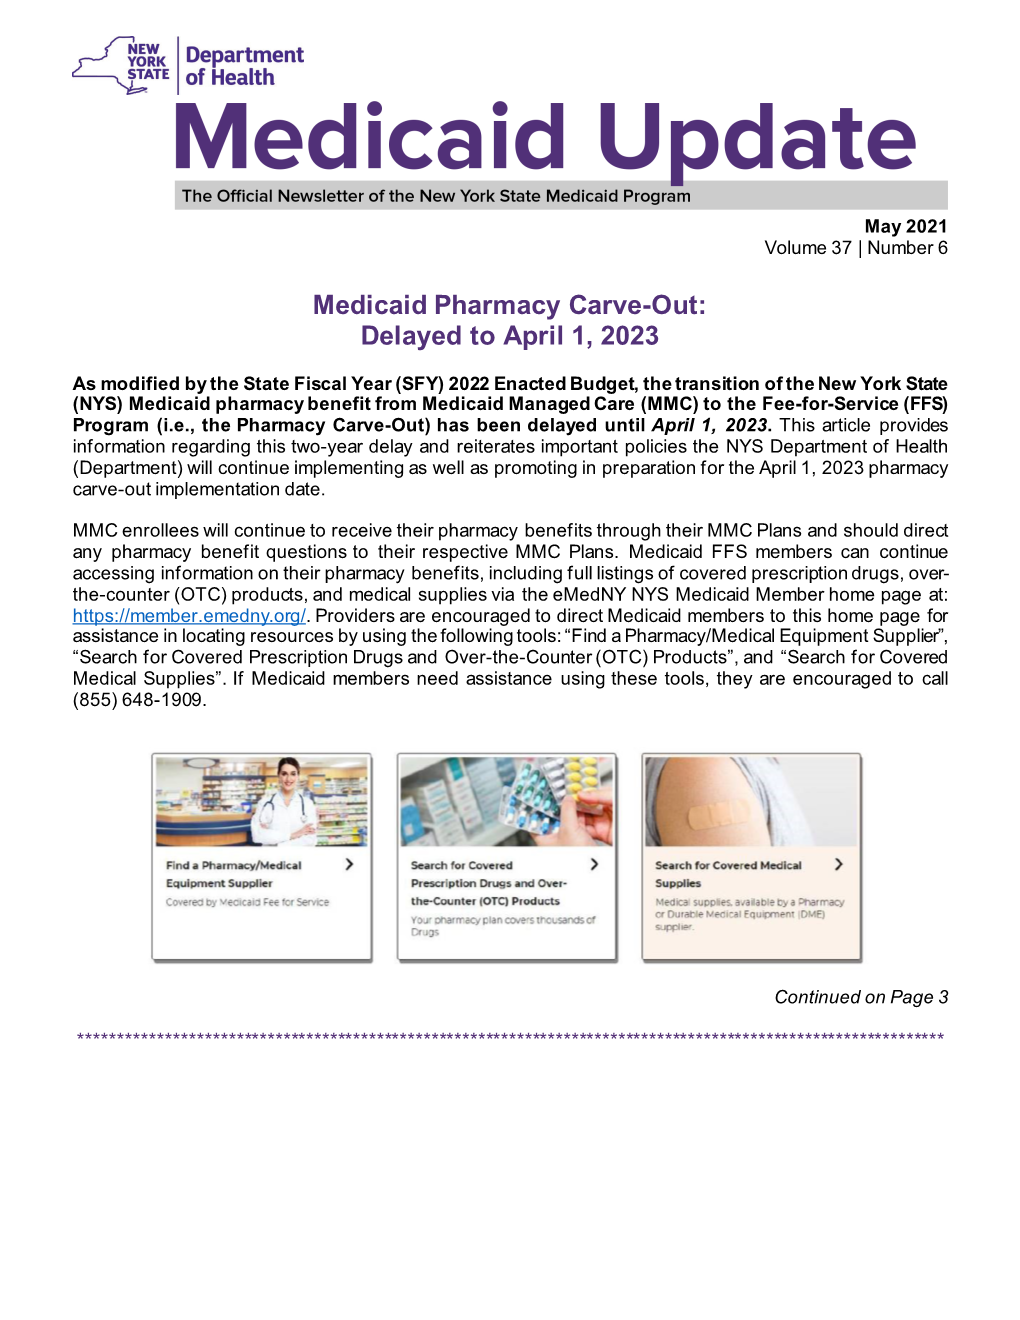 New York State Medicaid Update May 2021 Volume 37 Number 6